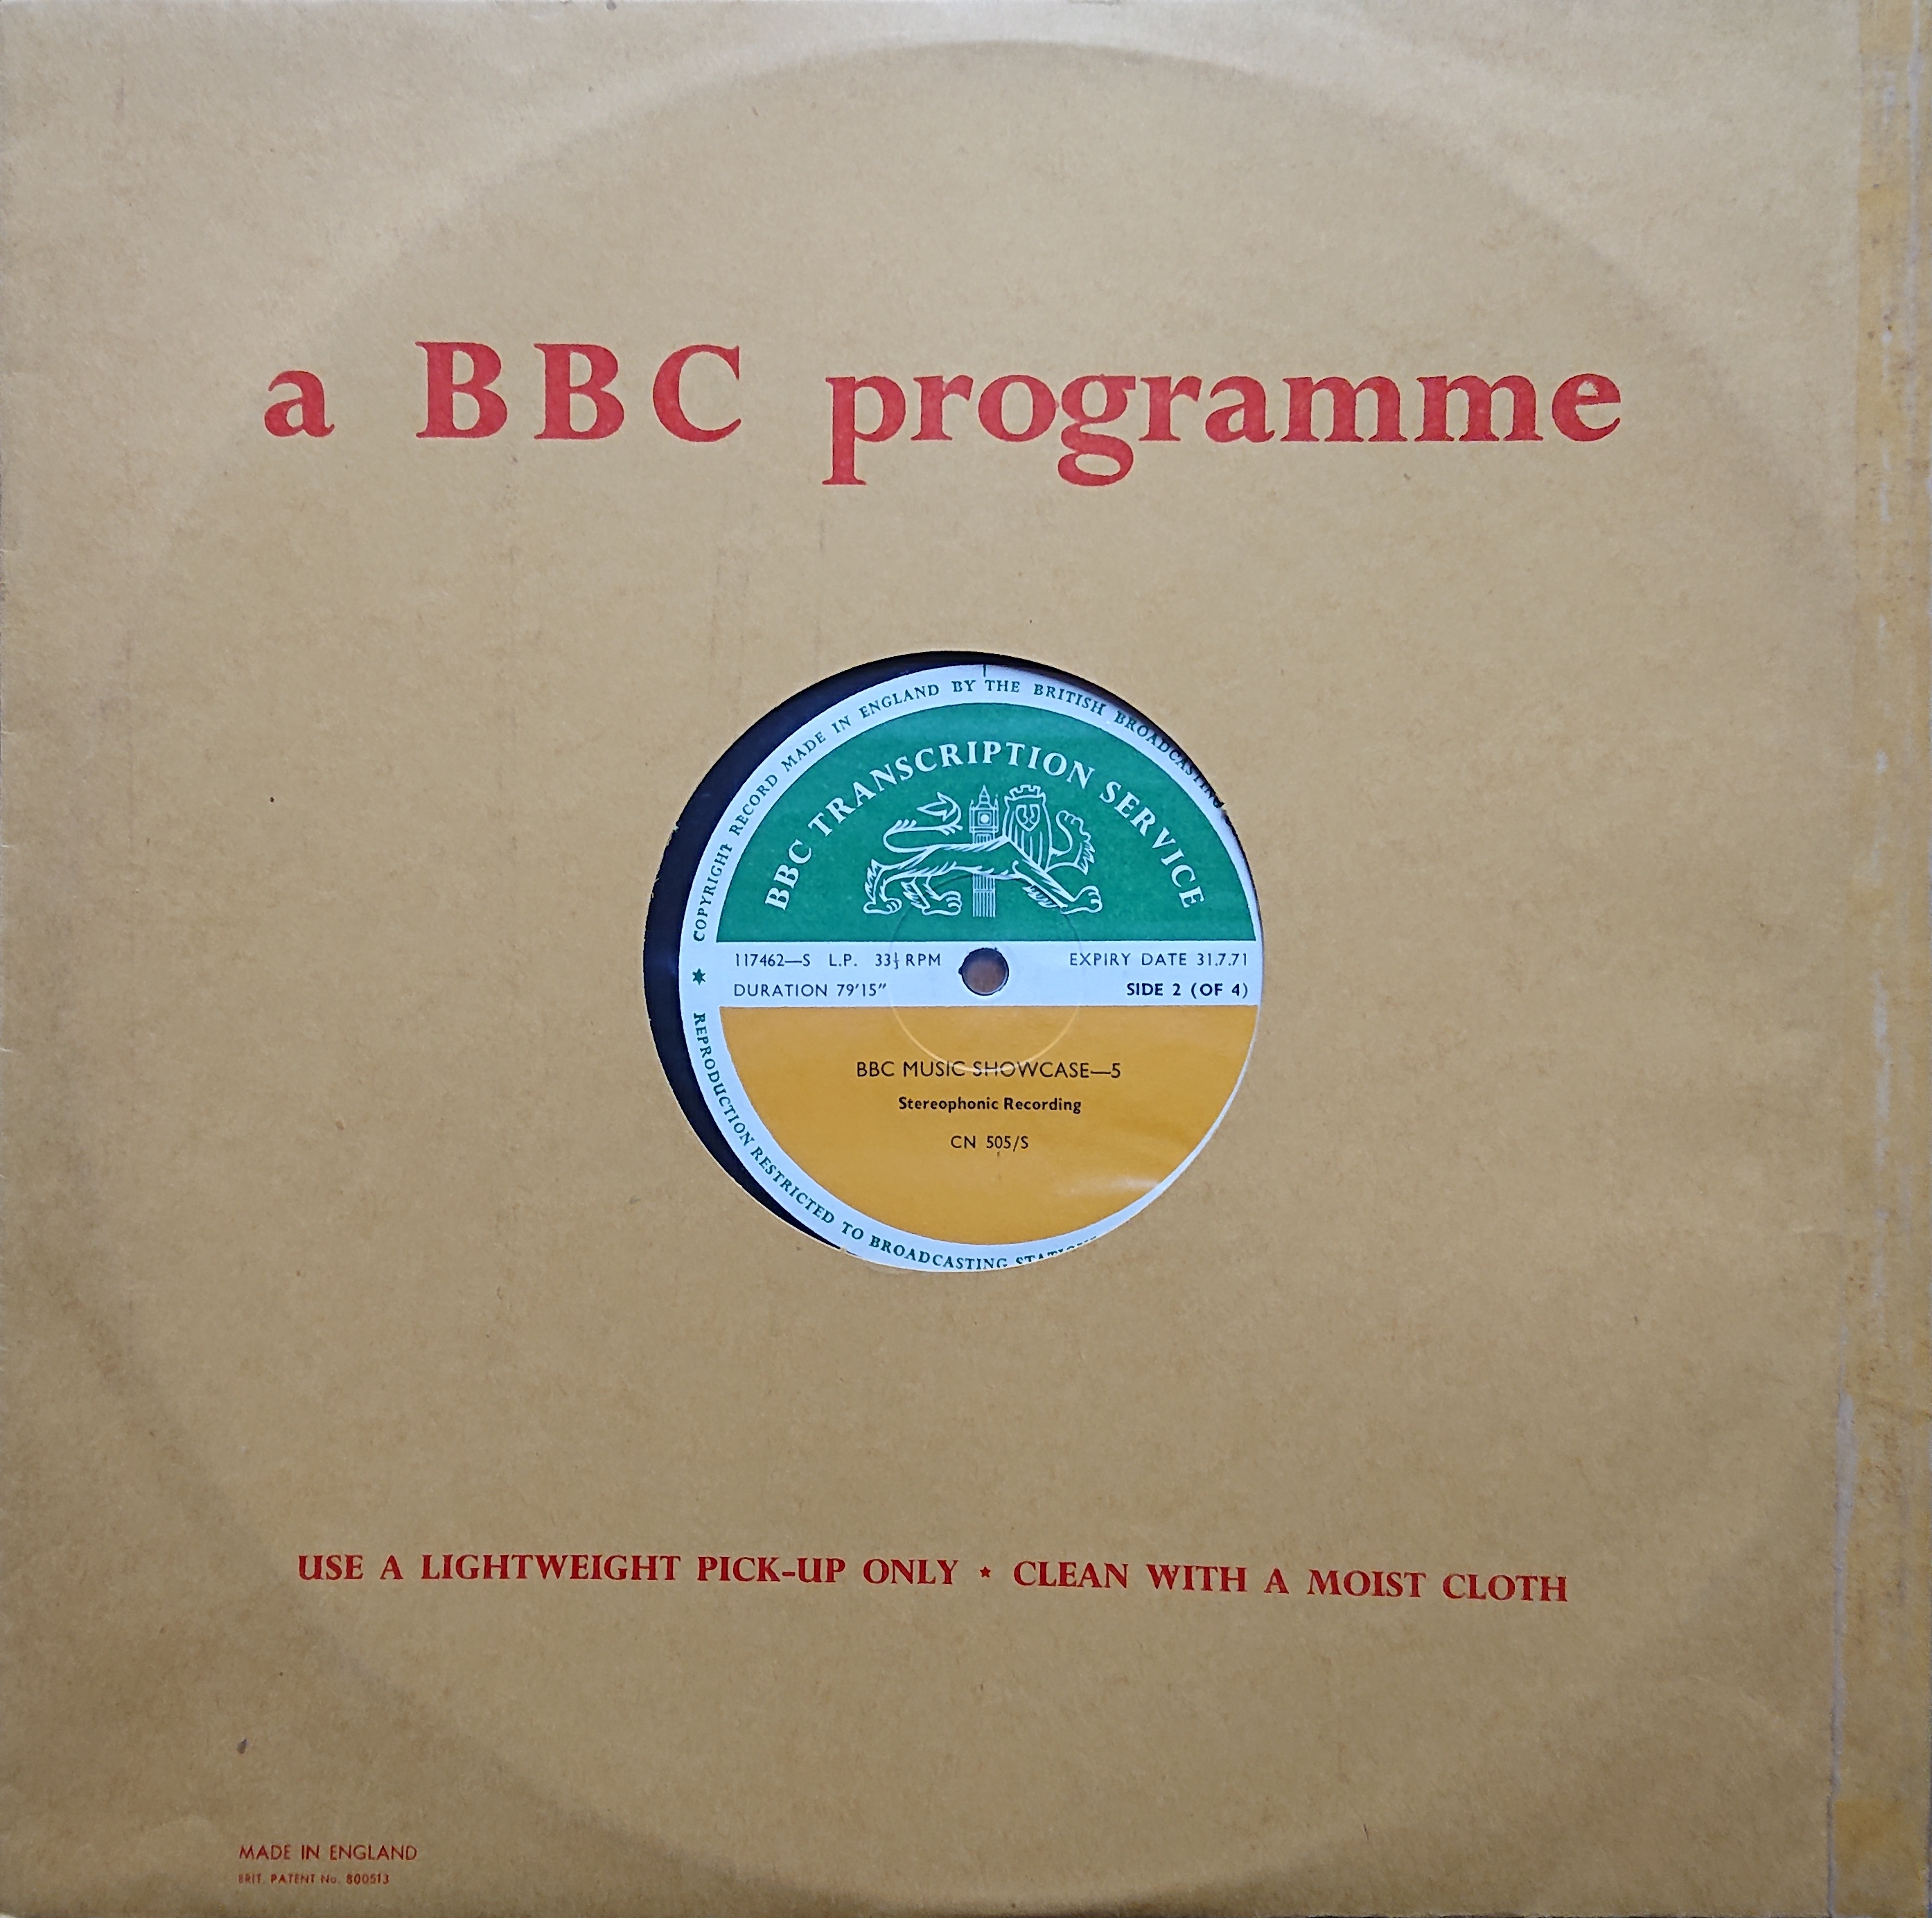 Picture of CN 505 S 10 BBC music showcase - 5 (Sides 2 & 4) by artist Various from the BBC records and Tapes library